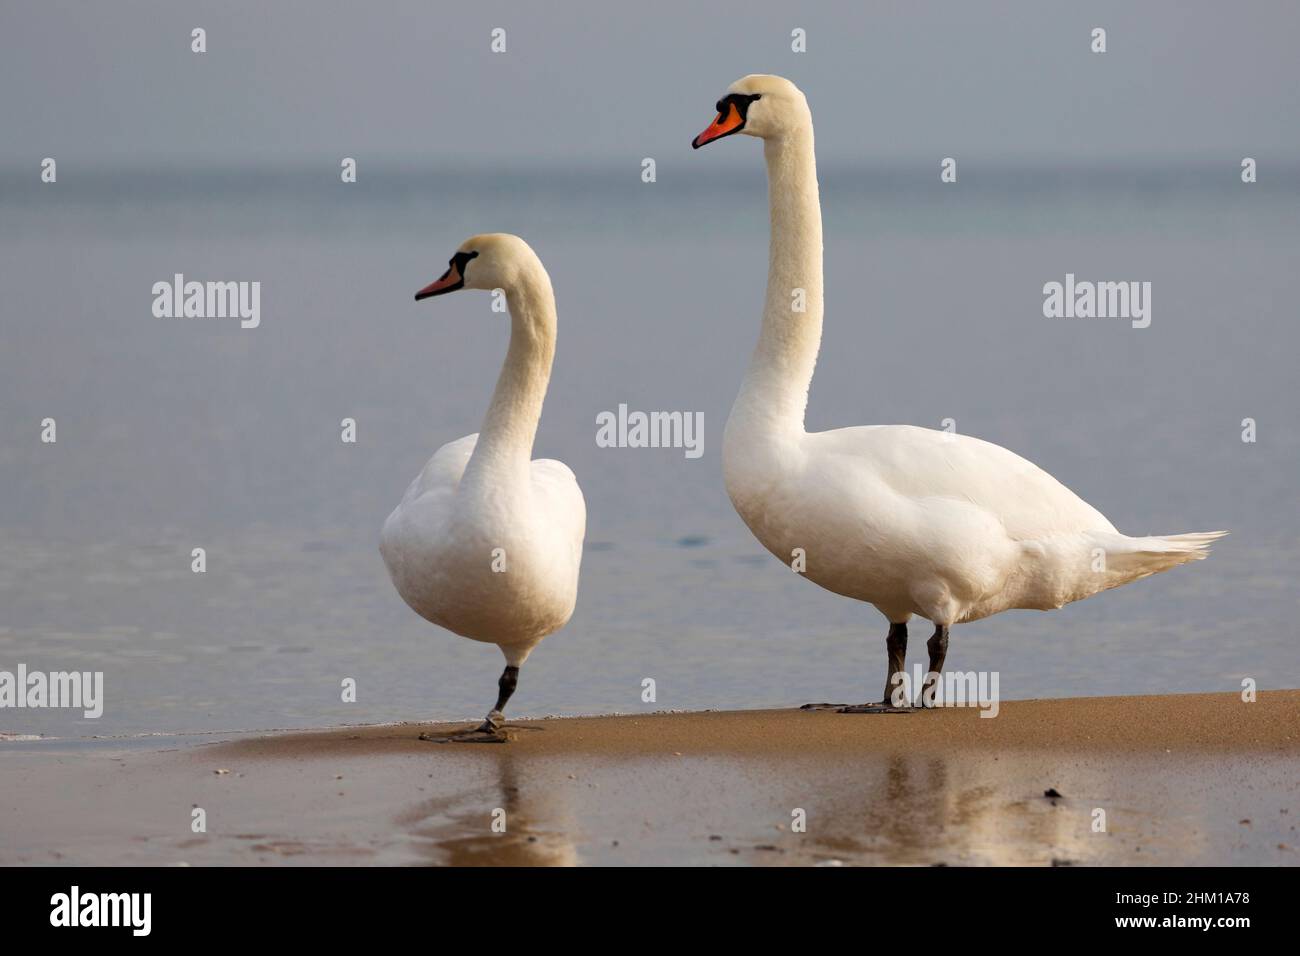 Swans in the wild near the sea Stock Photo